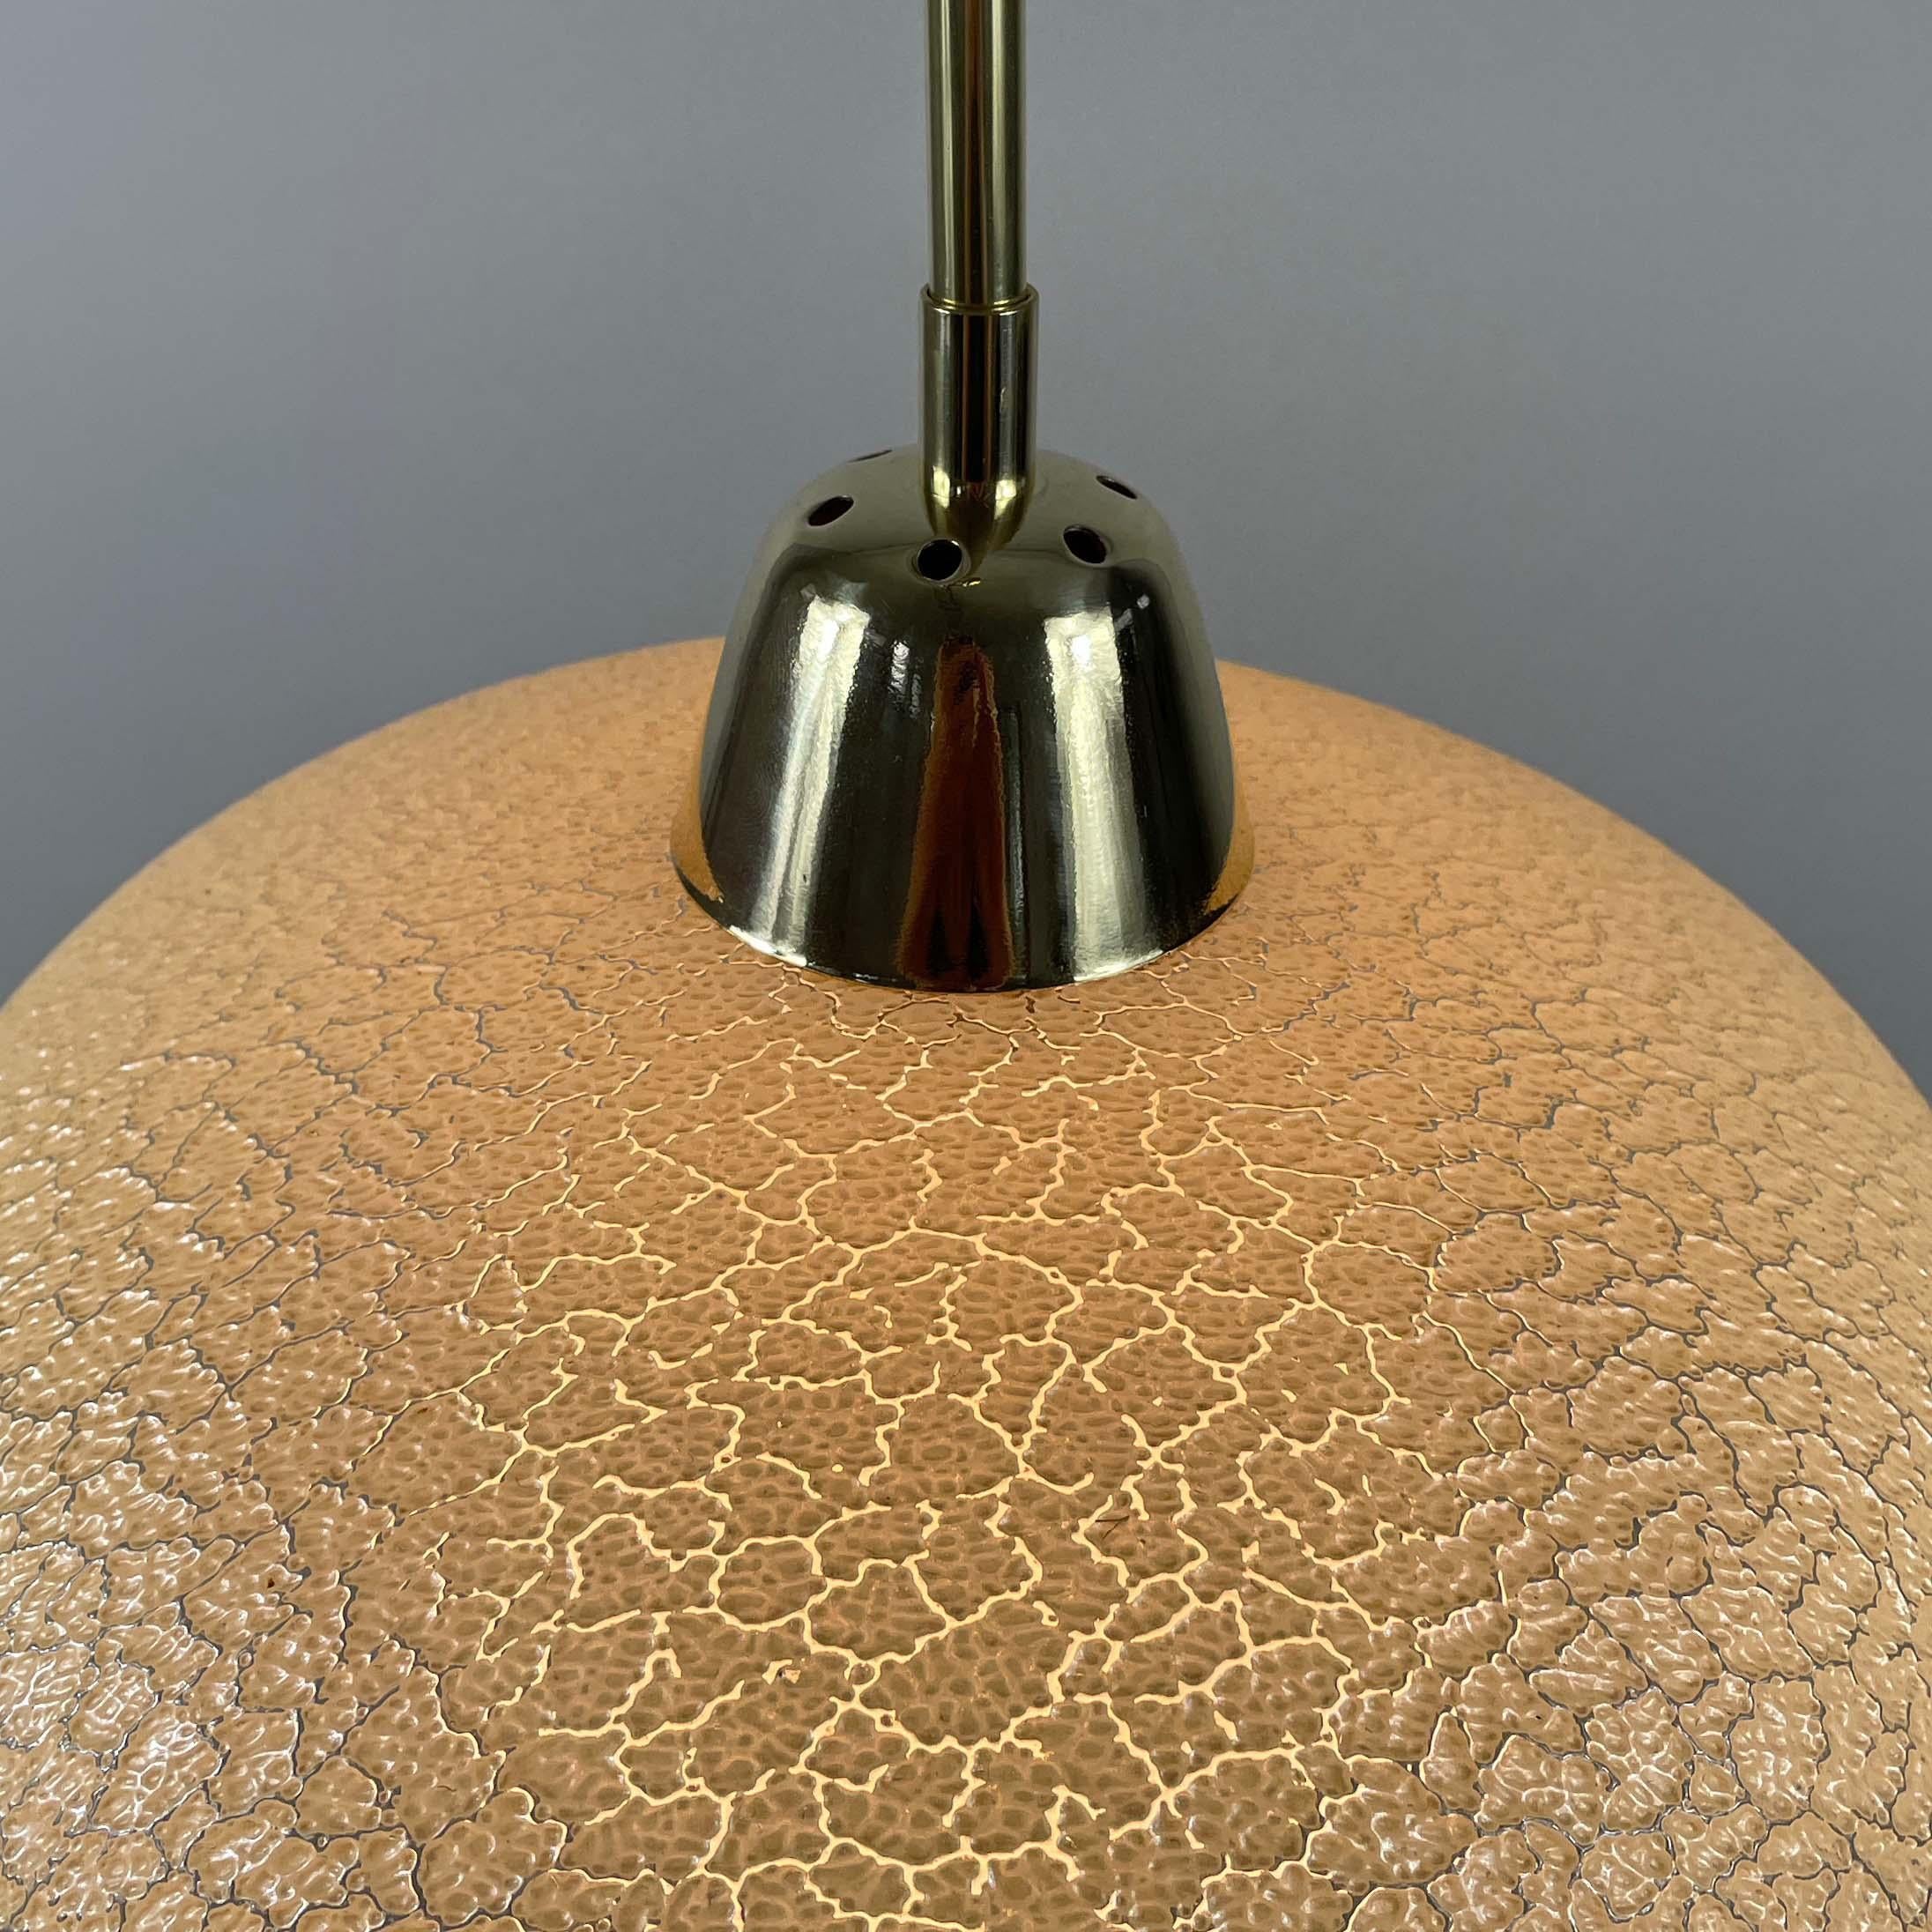 Cream Textured Glass and Brass Pendants, Sweden 1940s to 1950s For Sale 7